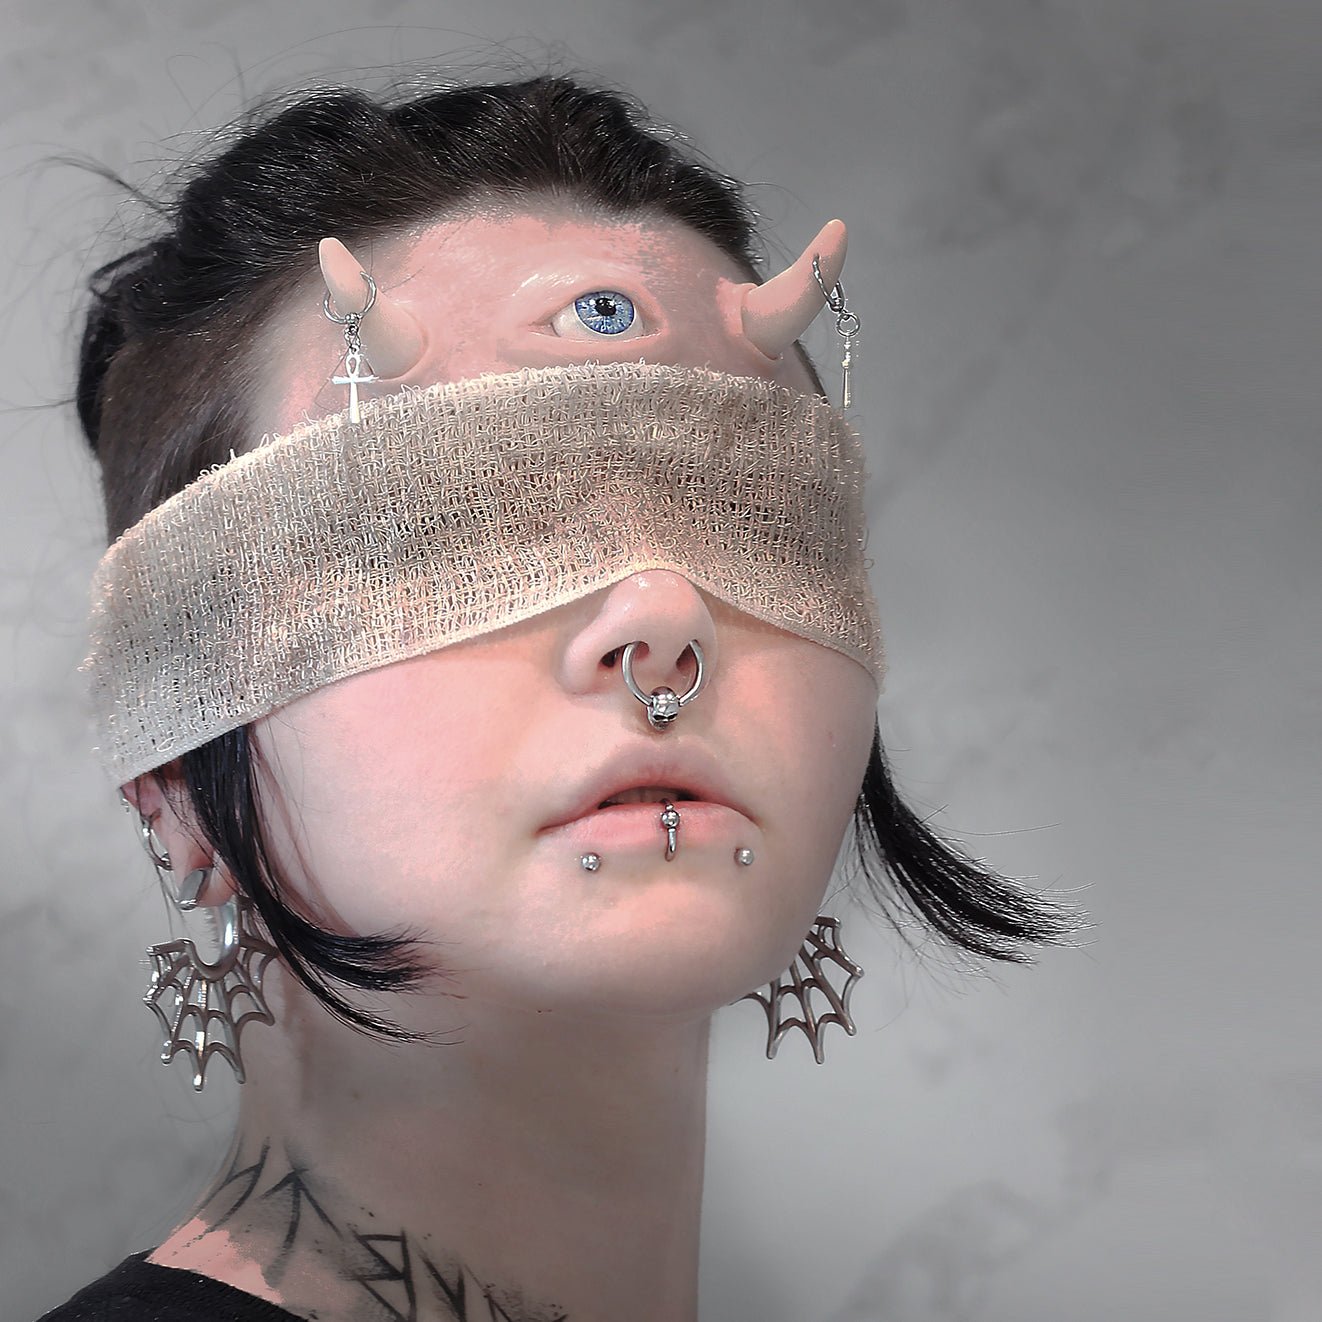 Woman in a blindfold wearing pierced horns and a third eye prosthetic